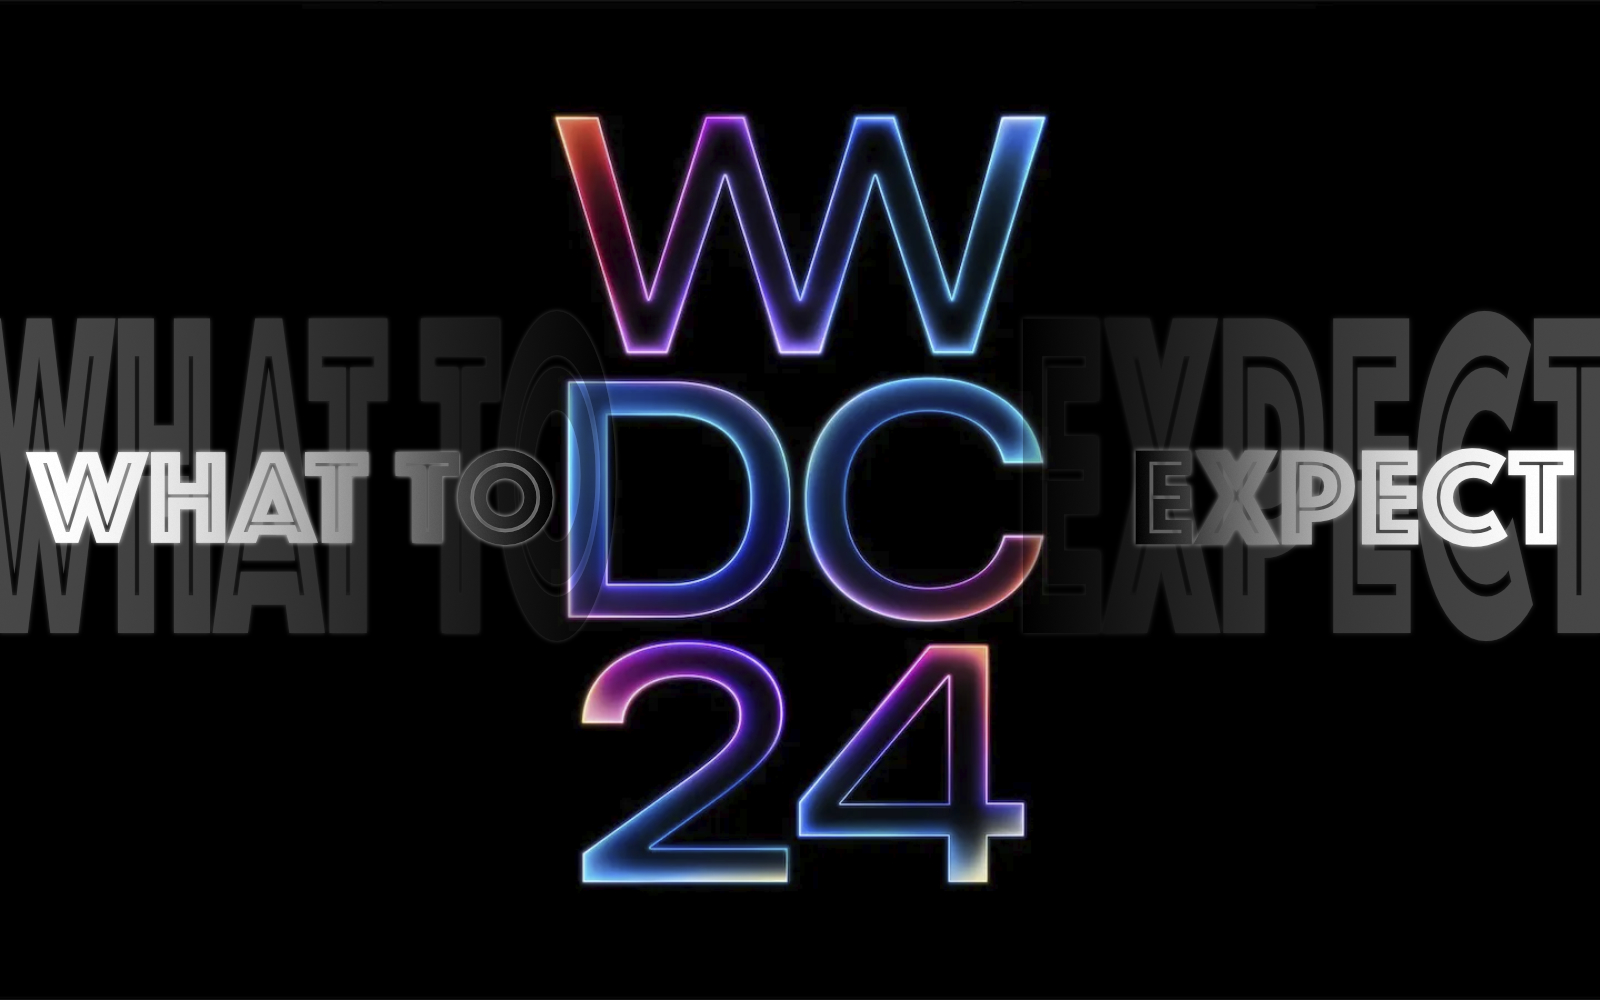 What-to-expect-for-wwdc24.jpg